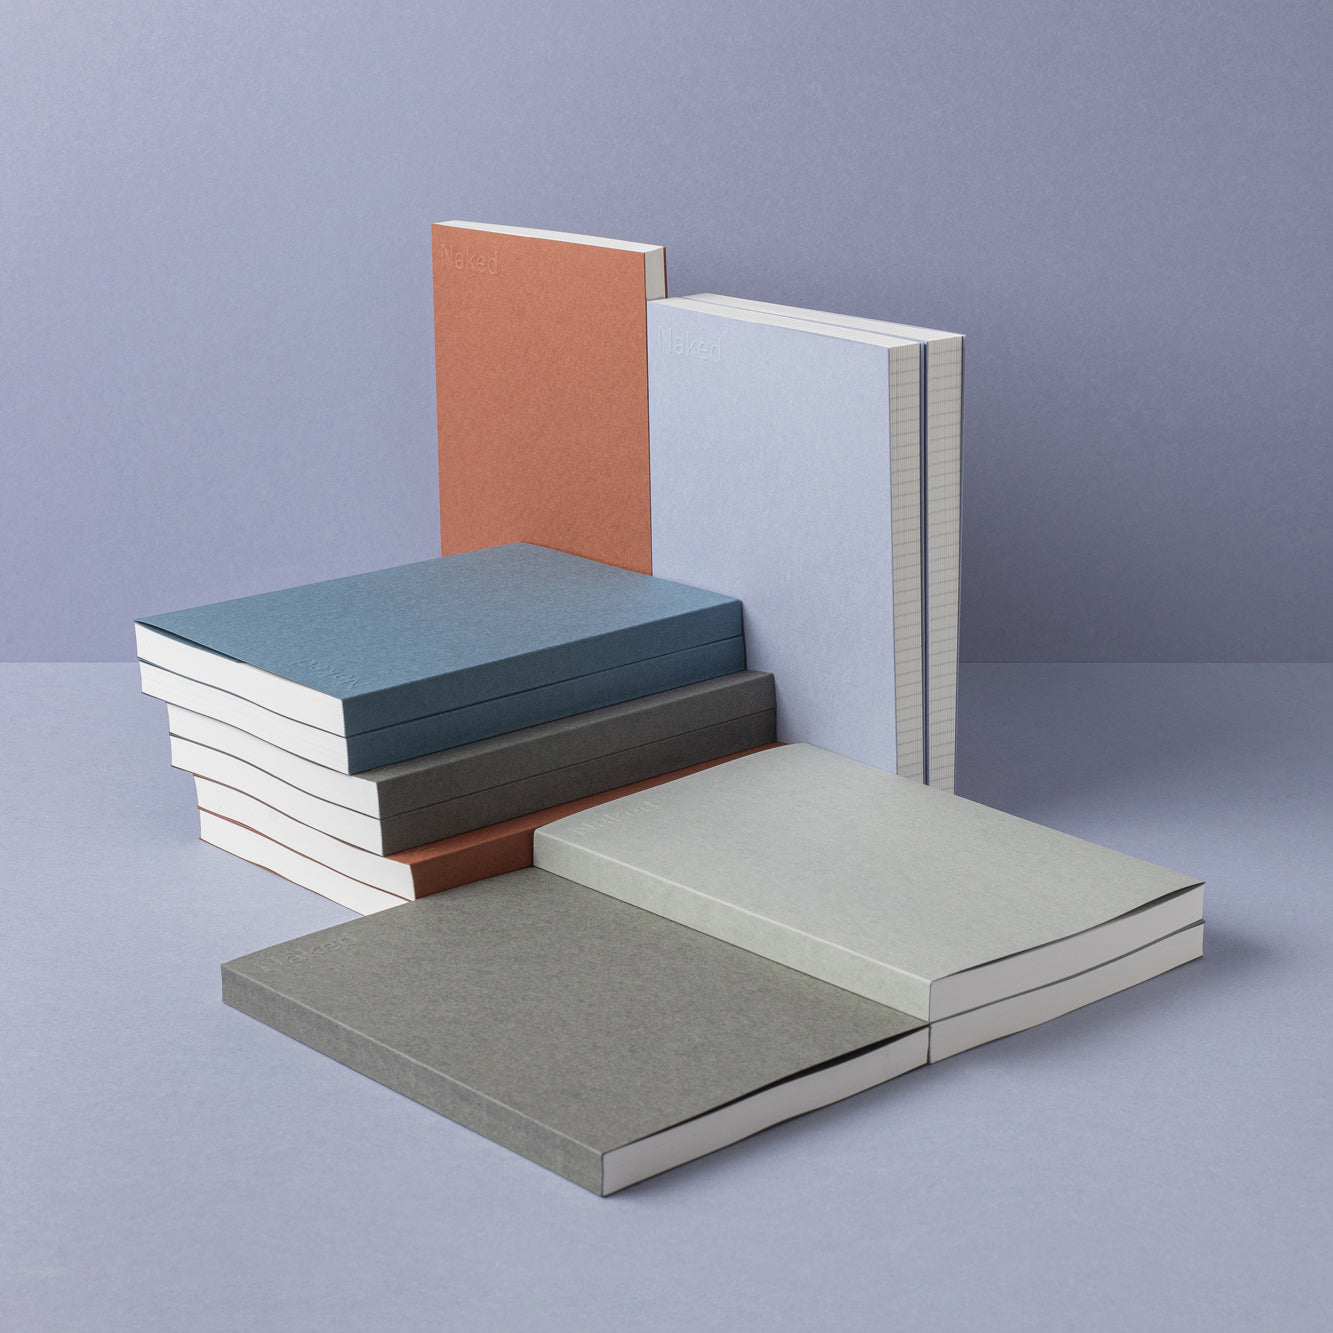 mishmash notebooks for school and journaling